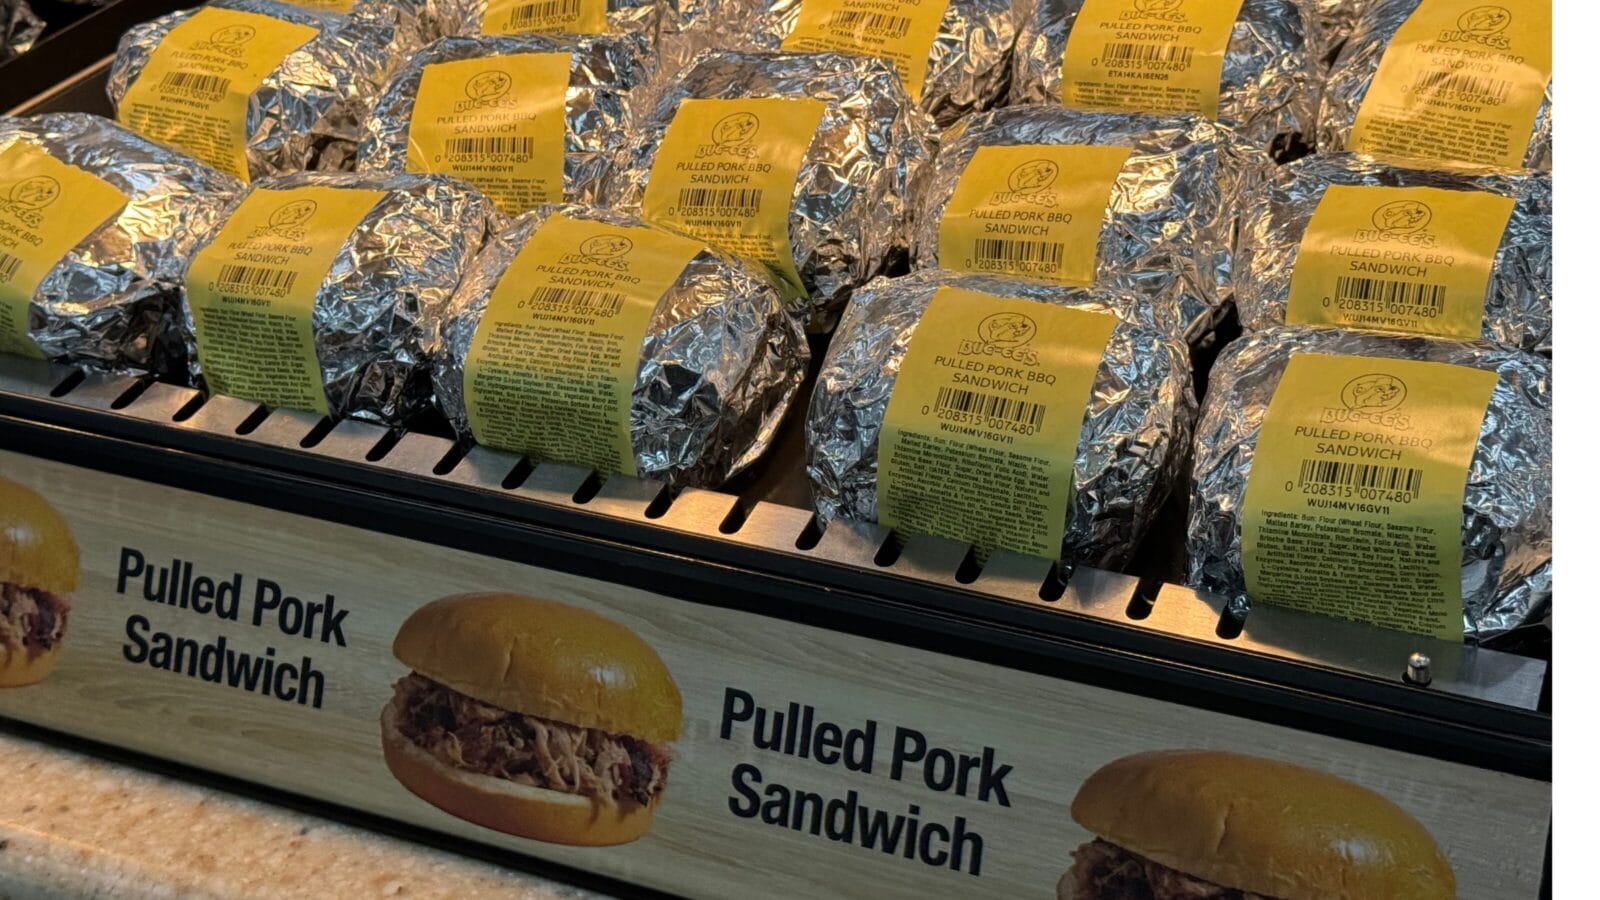 <p>The brisket and BBQ pork at Buc-ee’s is iconic and unique to this chain. You will hear the meat choppers (wearing cowboy hats, of course) yell “fresh brisket on the board” over and over as they slice and chop meat all day. You can also order brisket or BBQ by the pound. </p>